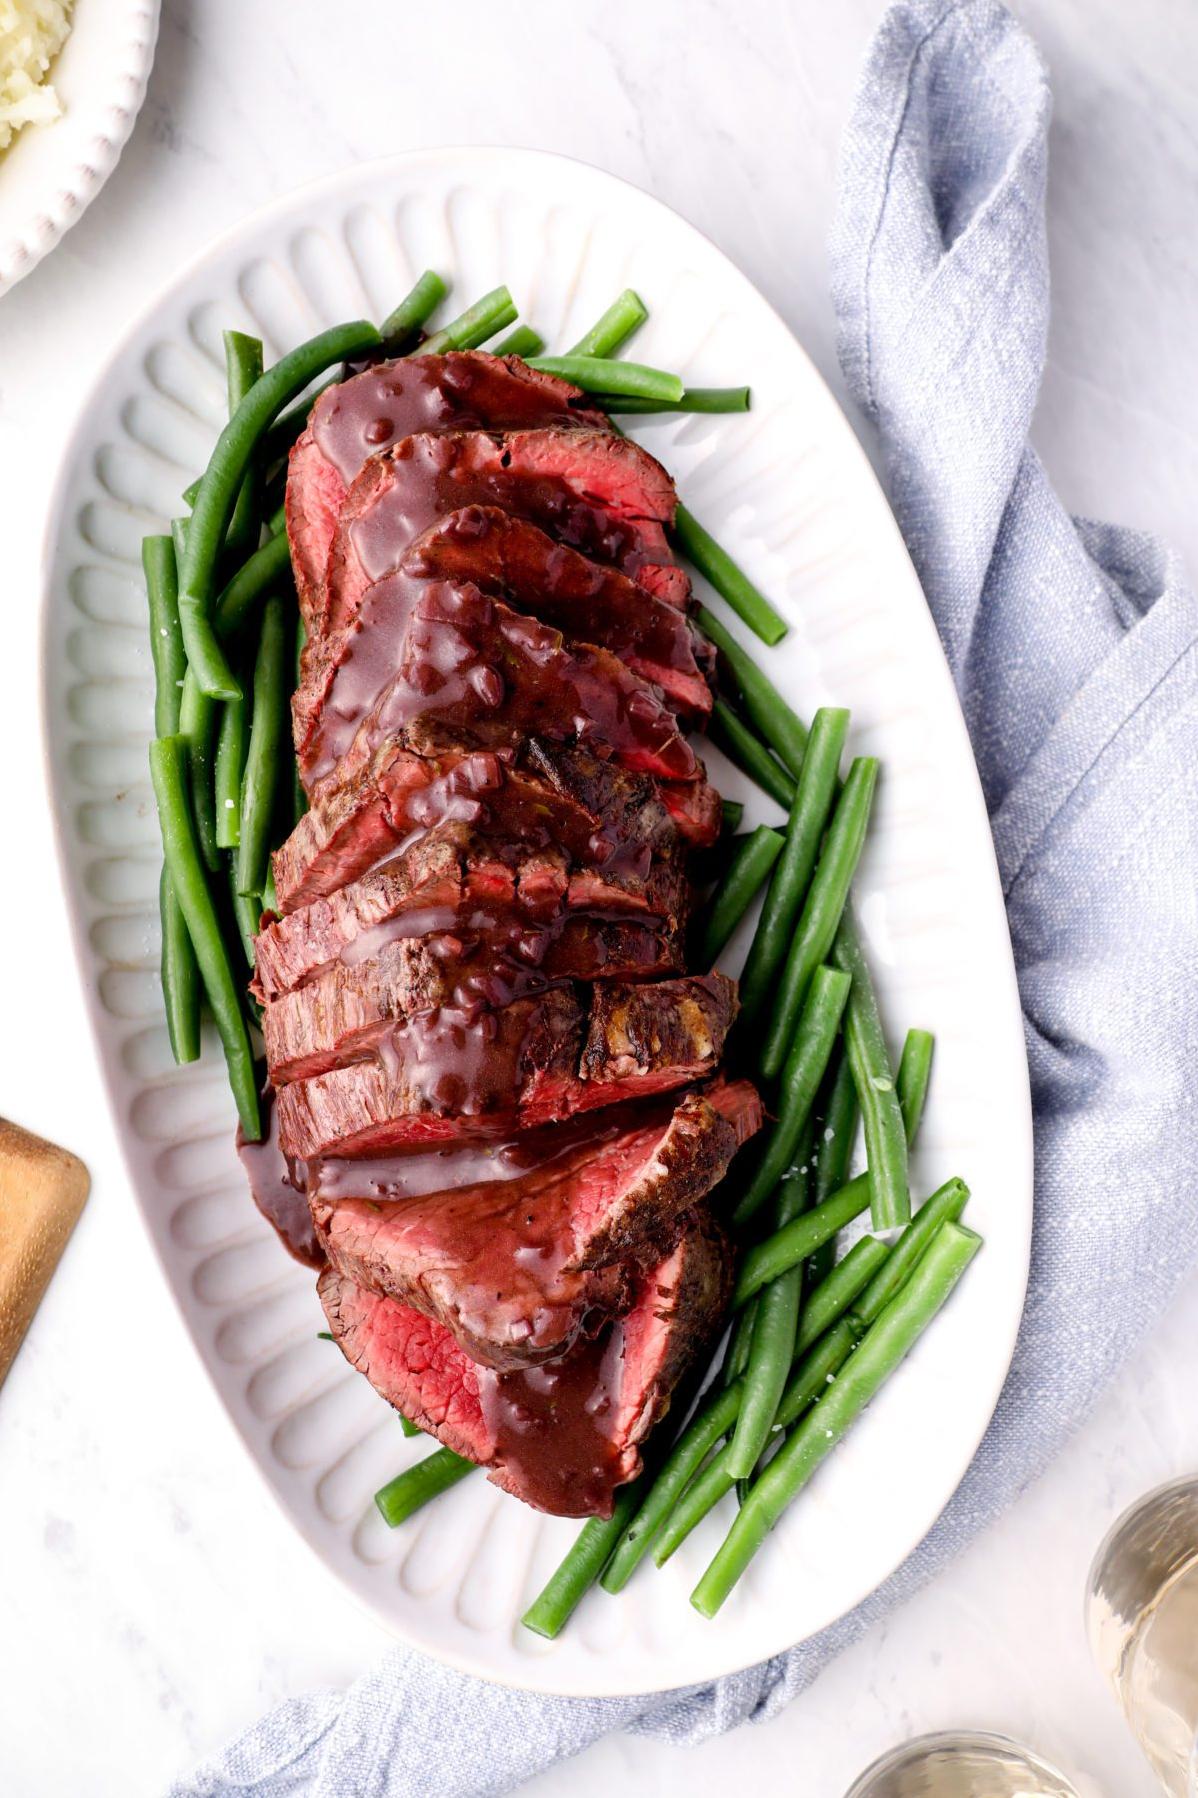  Perfectly cooked and beautifully seared beef tenderloin, served with a rich and flavorful wine sauce.